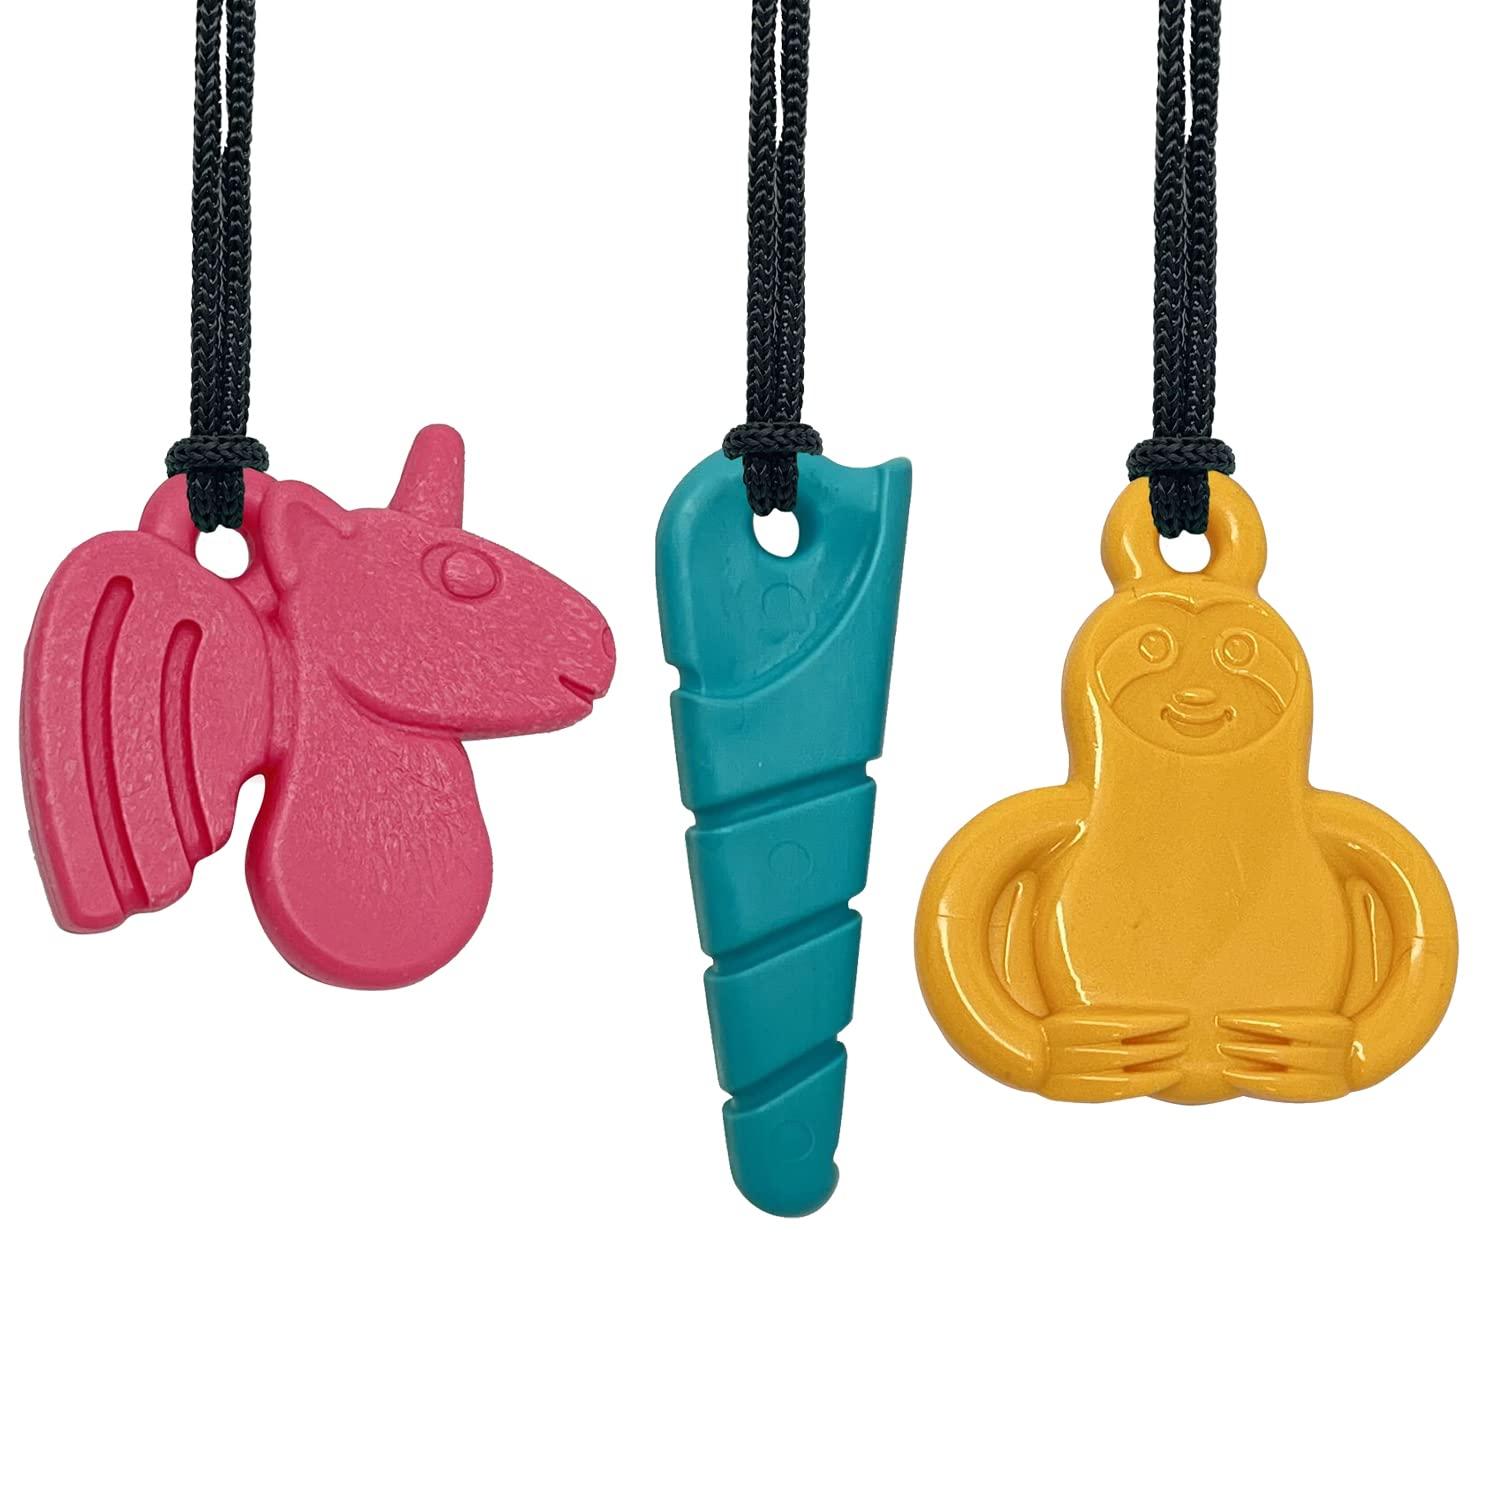 Tilcare Chew Chew Sensory Necklace 3-Pack – Best for Kids or Adults | eBay